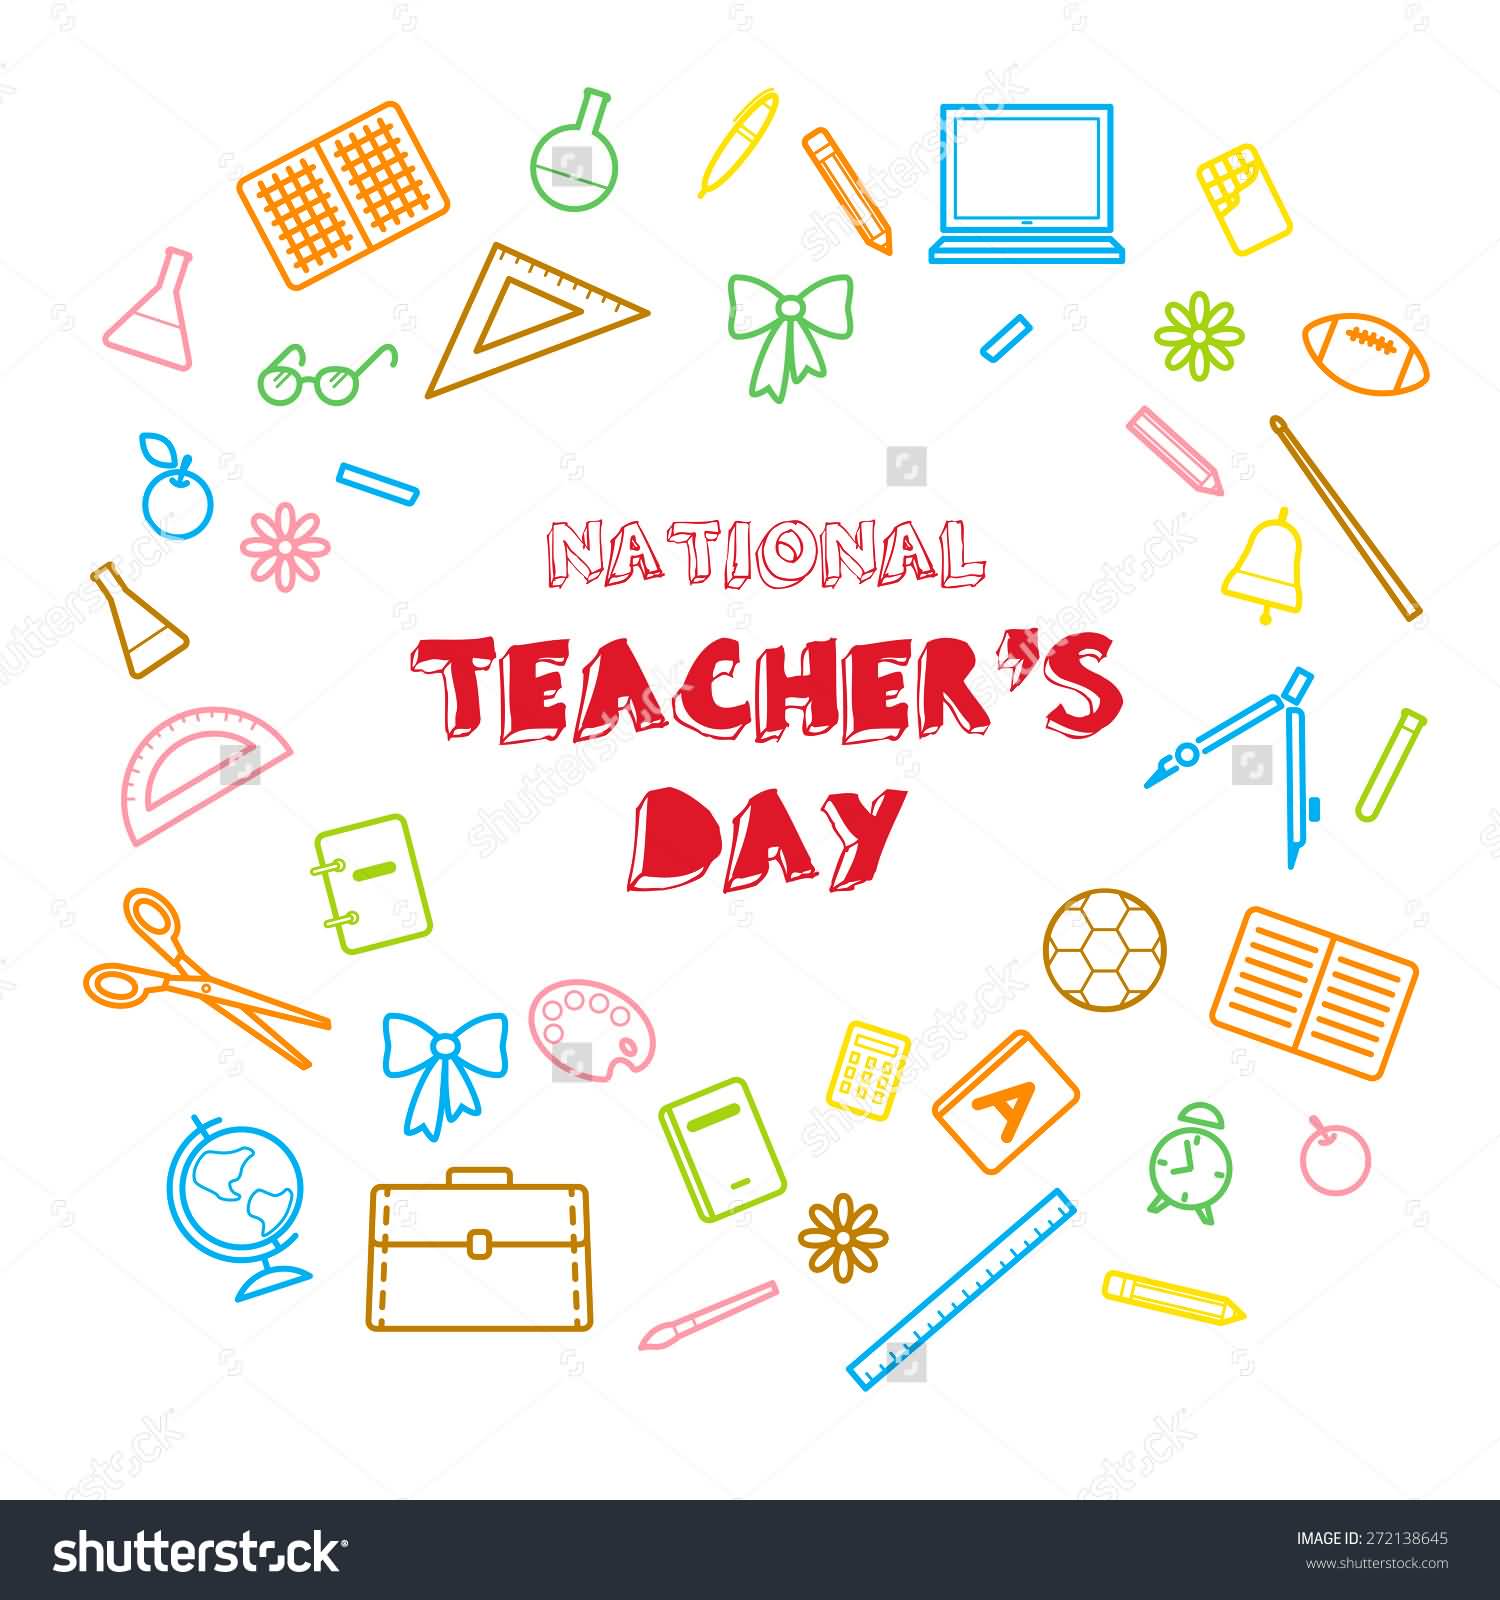 National Teacher's Day Colorful Illustration